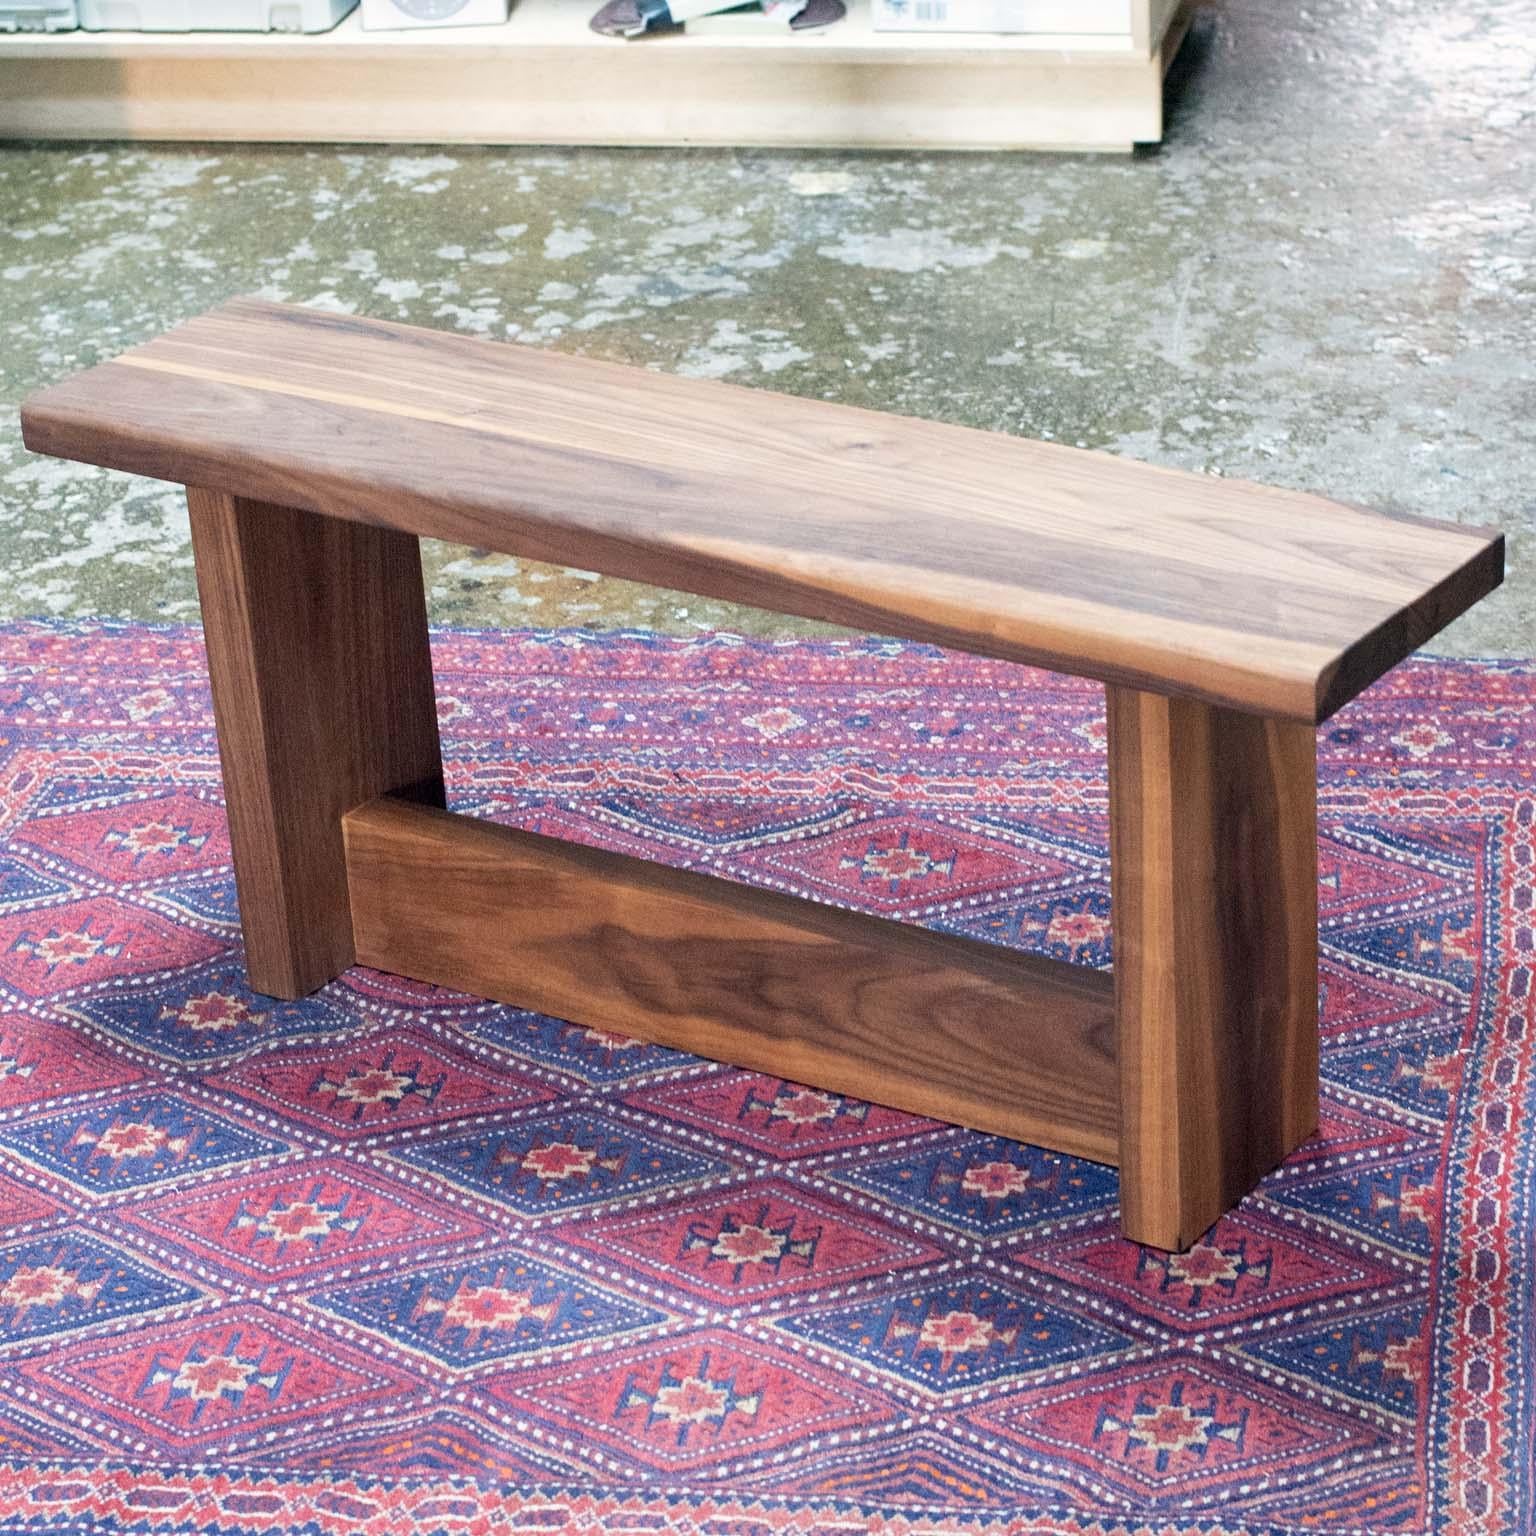 Barney's Bench is hand crated of solid walnut. The design features minimal details, allowing the character of the wood to be the main feature. 

This piece is fully customizable. Customers can specify the dimensions, wood species, and wood